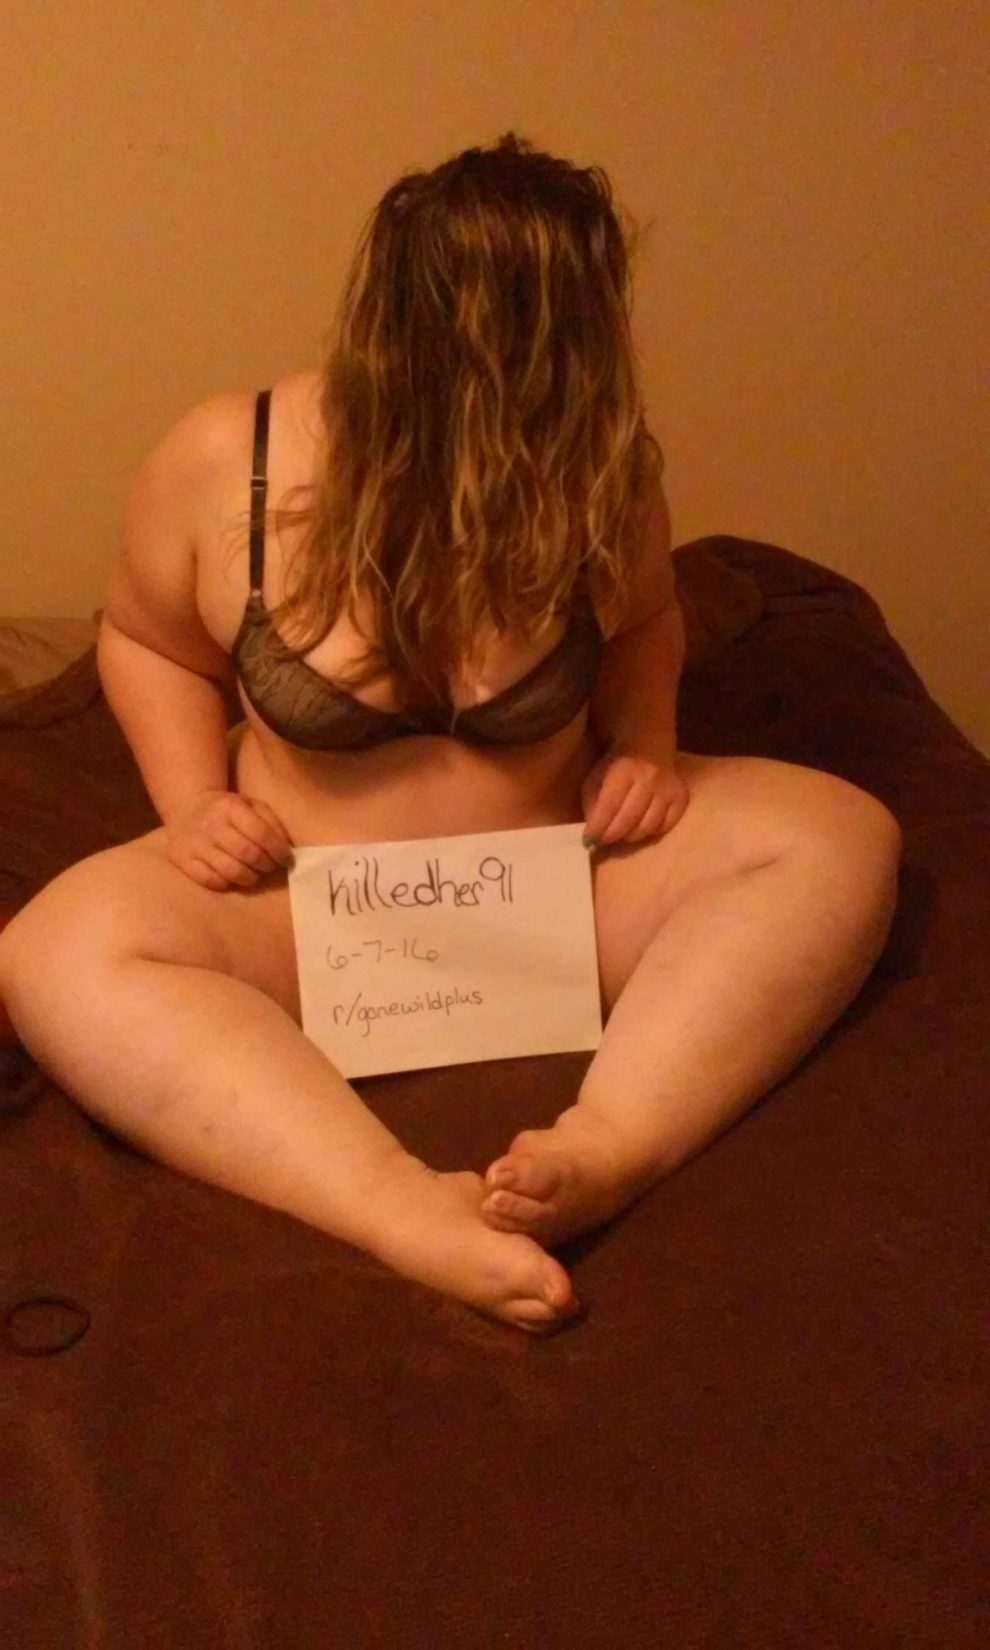 Trying to get my [VERIFICATION] and learn how to be more comfortable with my body